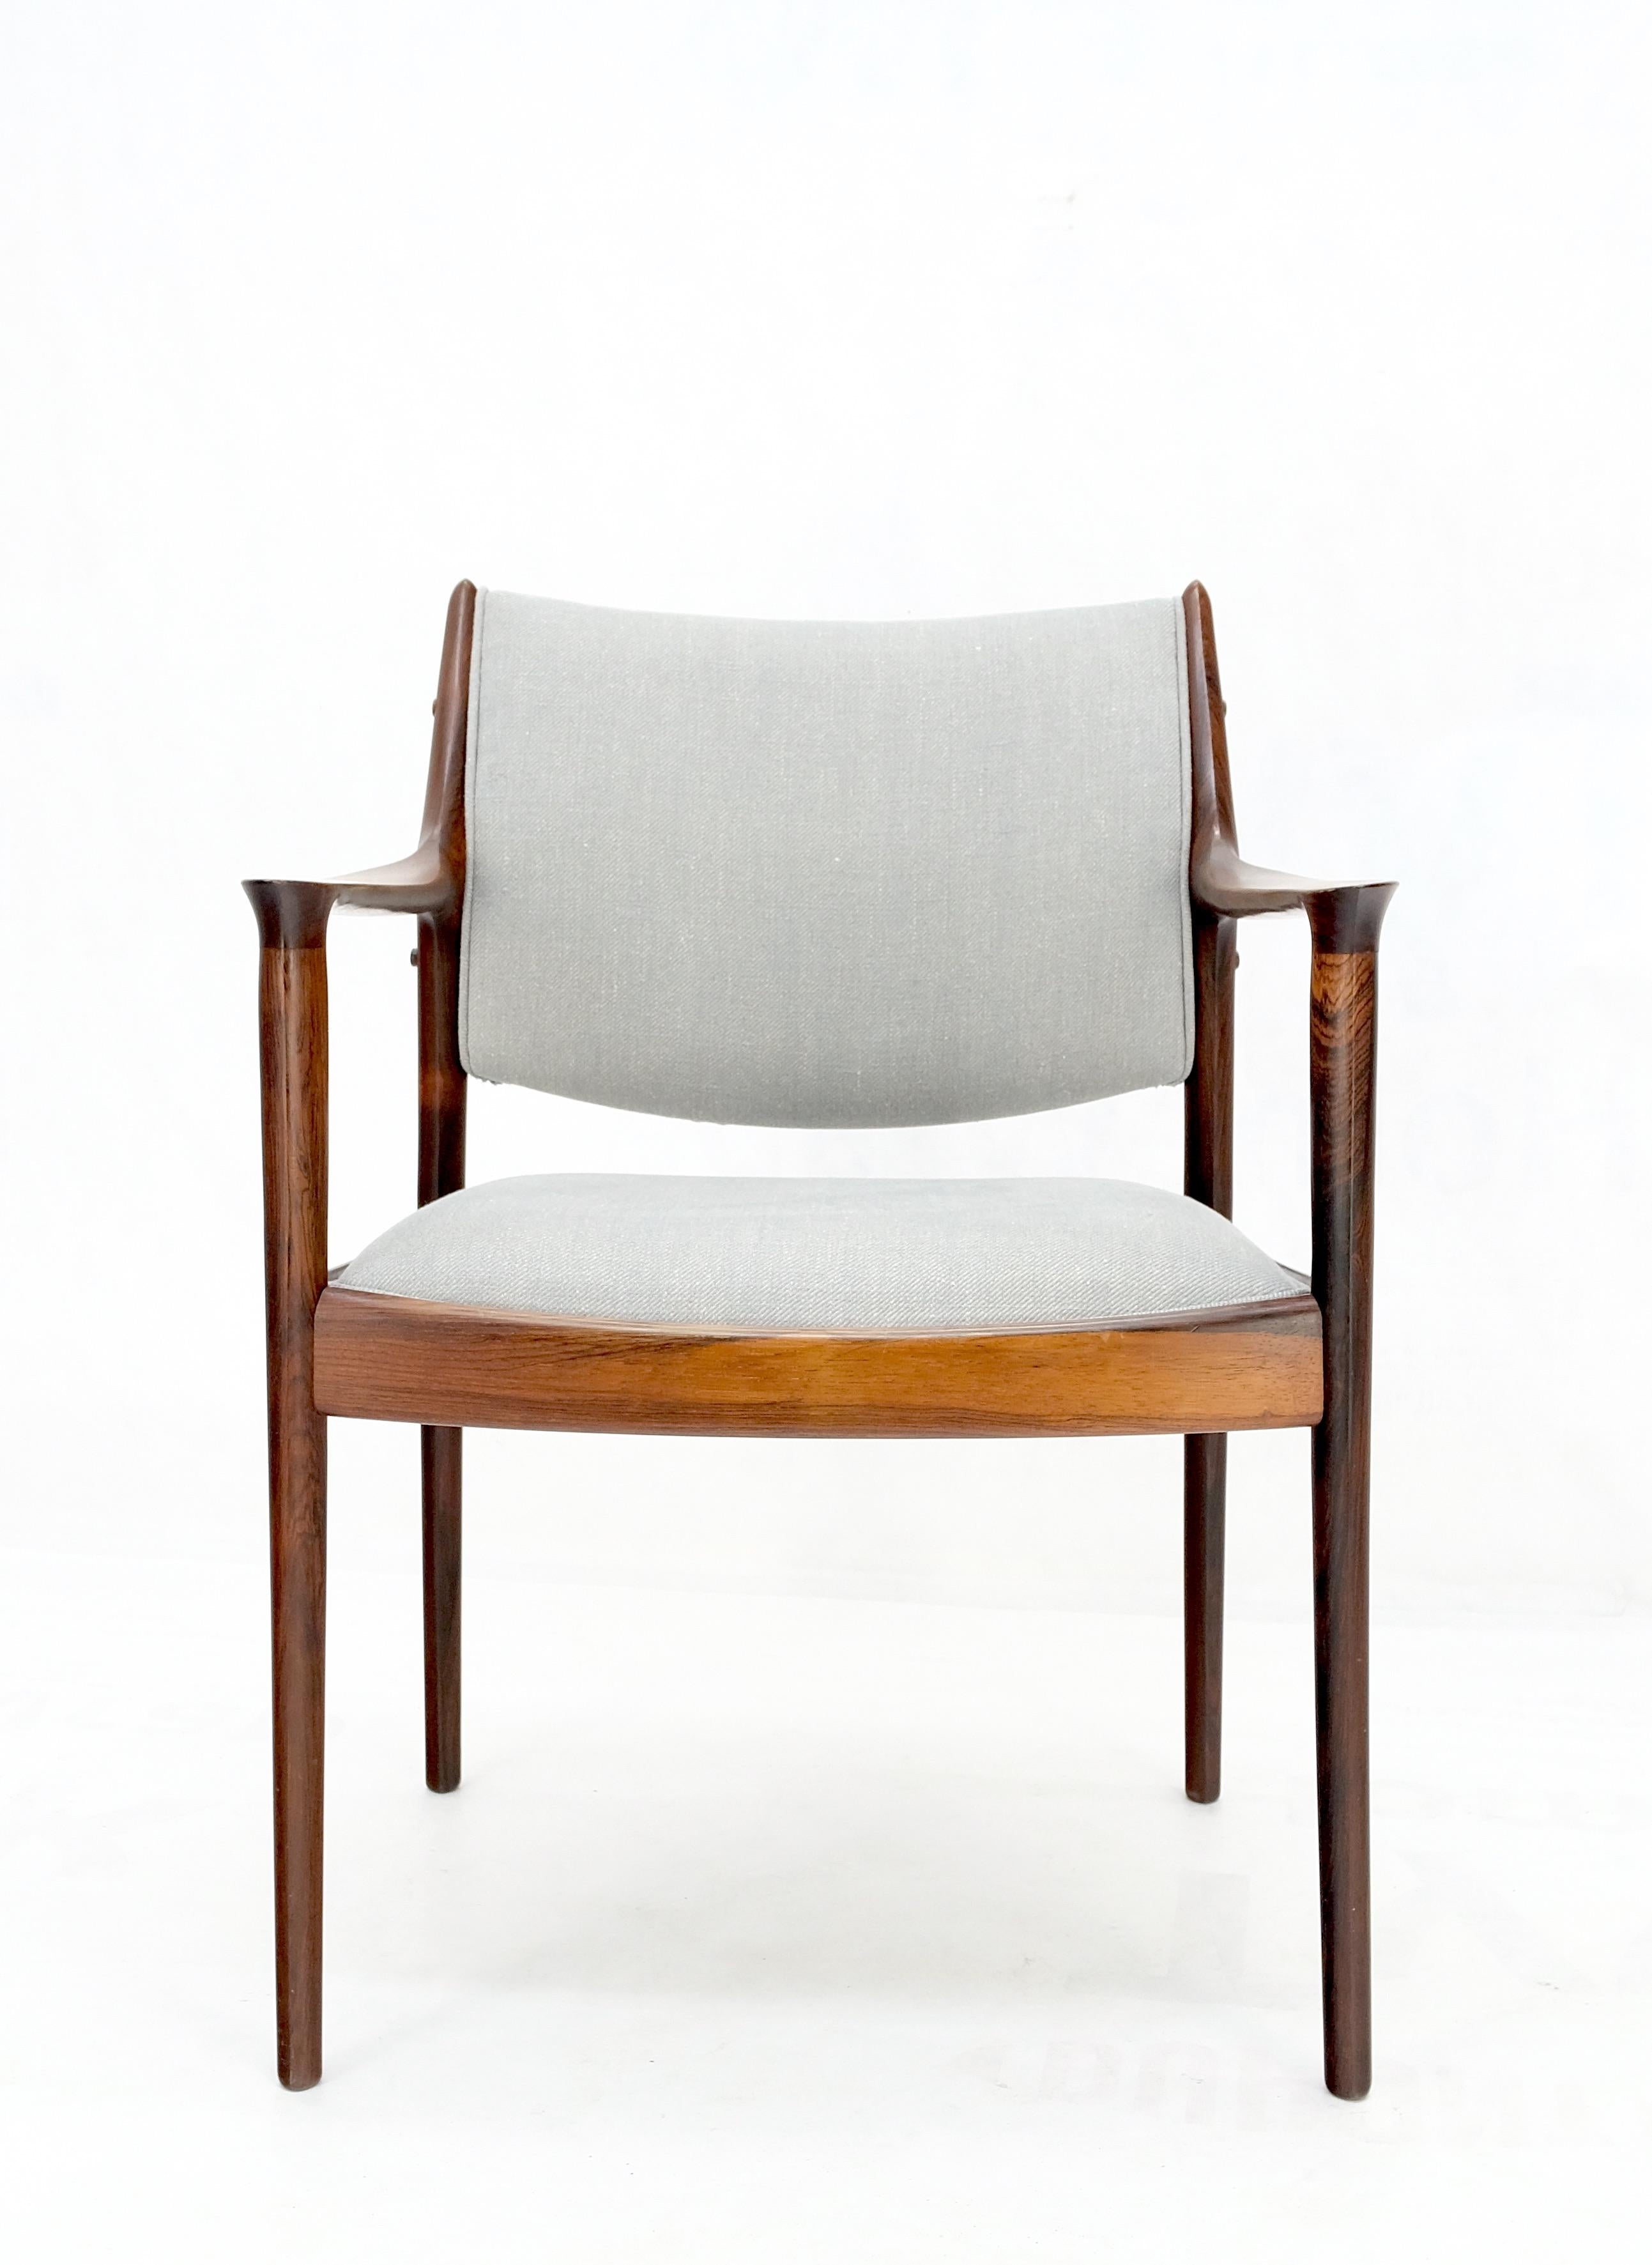 Lacquered Finn Juhl Attributed Heavy Solid Rosewood Arm Desk Chair New Upholstery Mint! For Sale